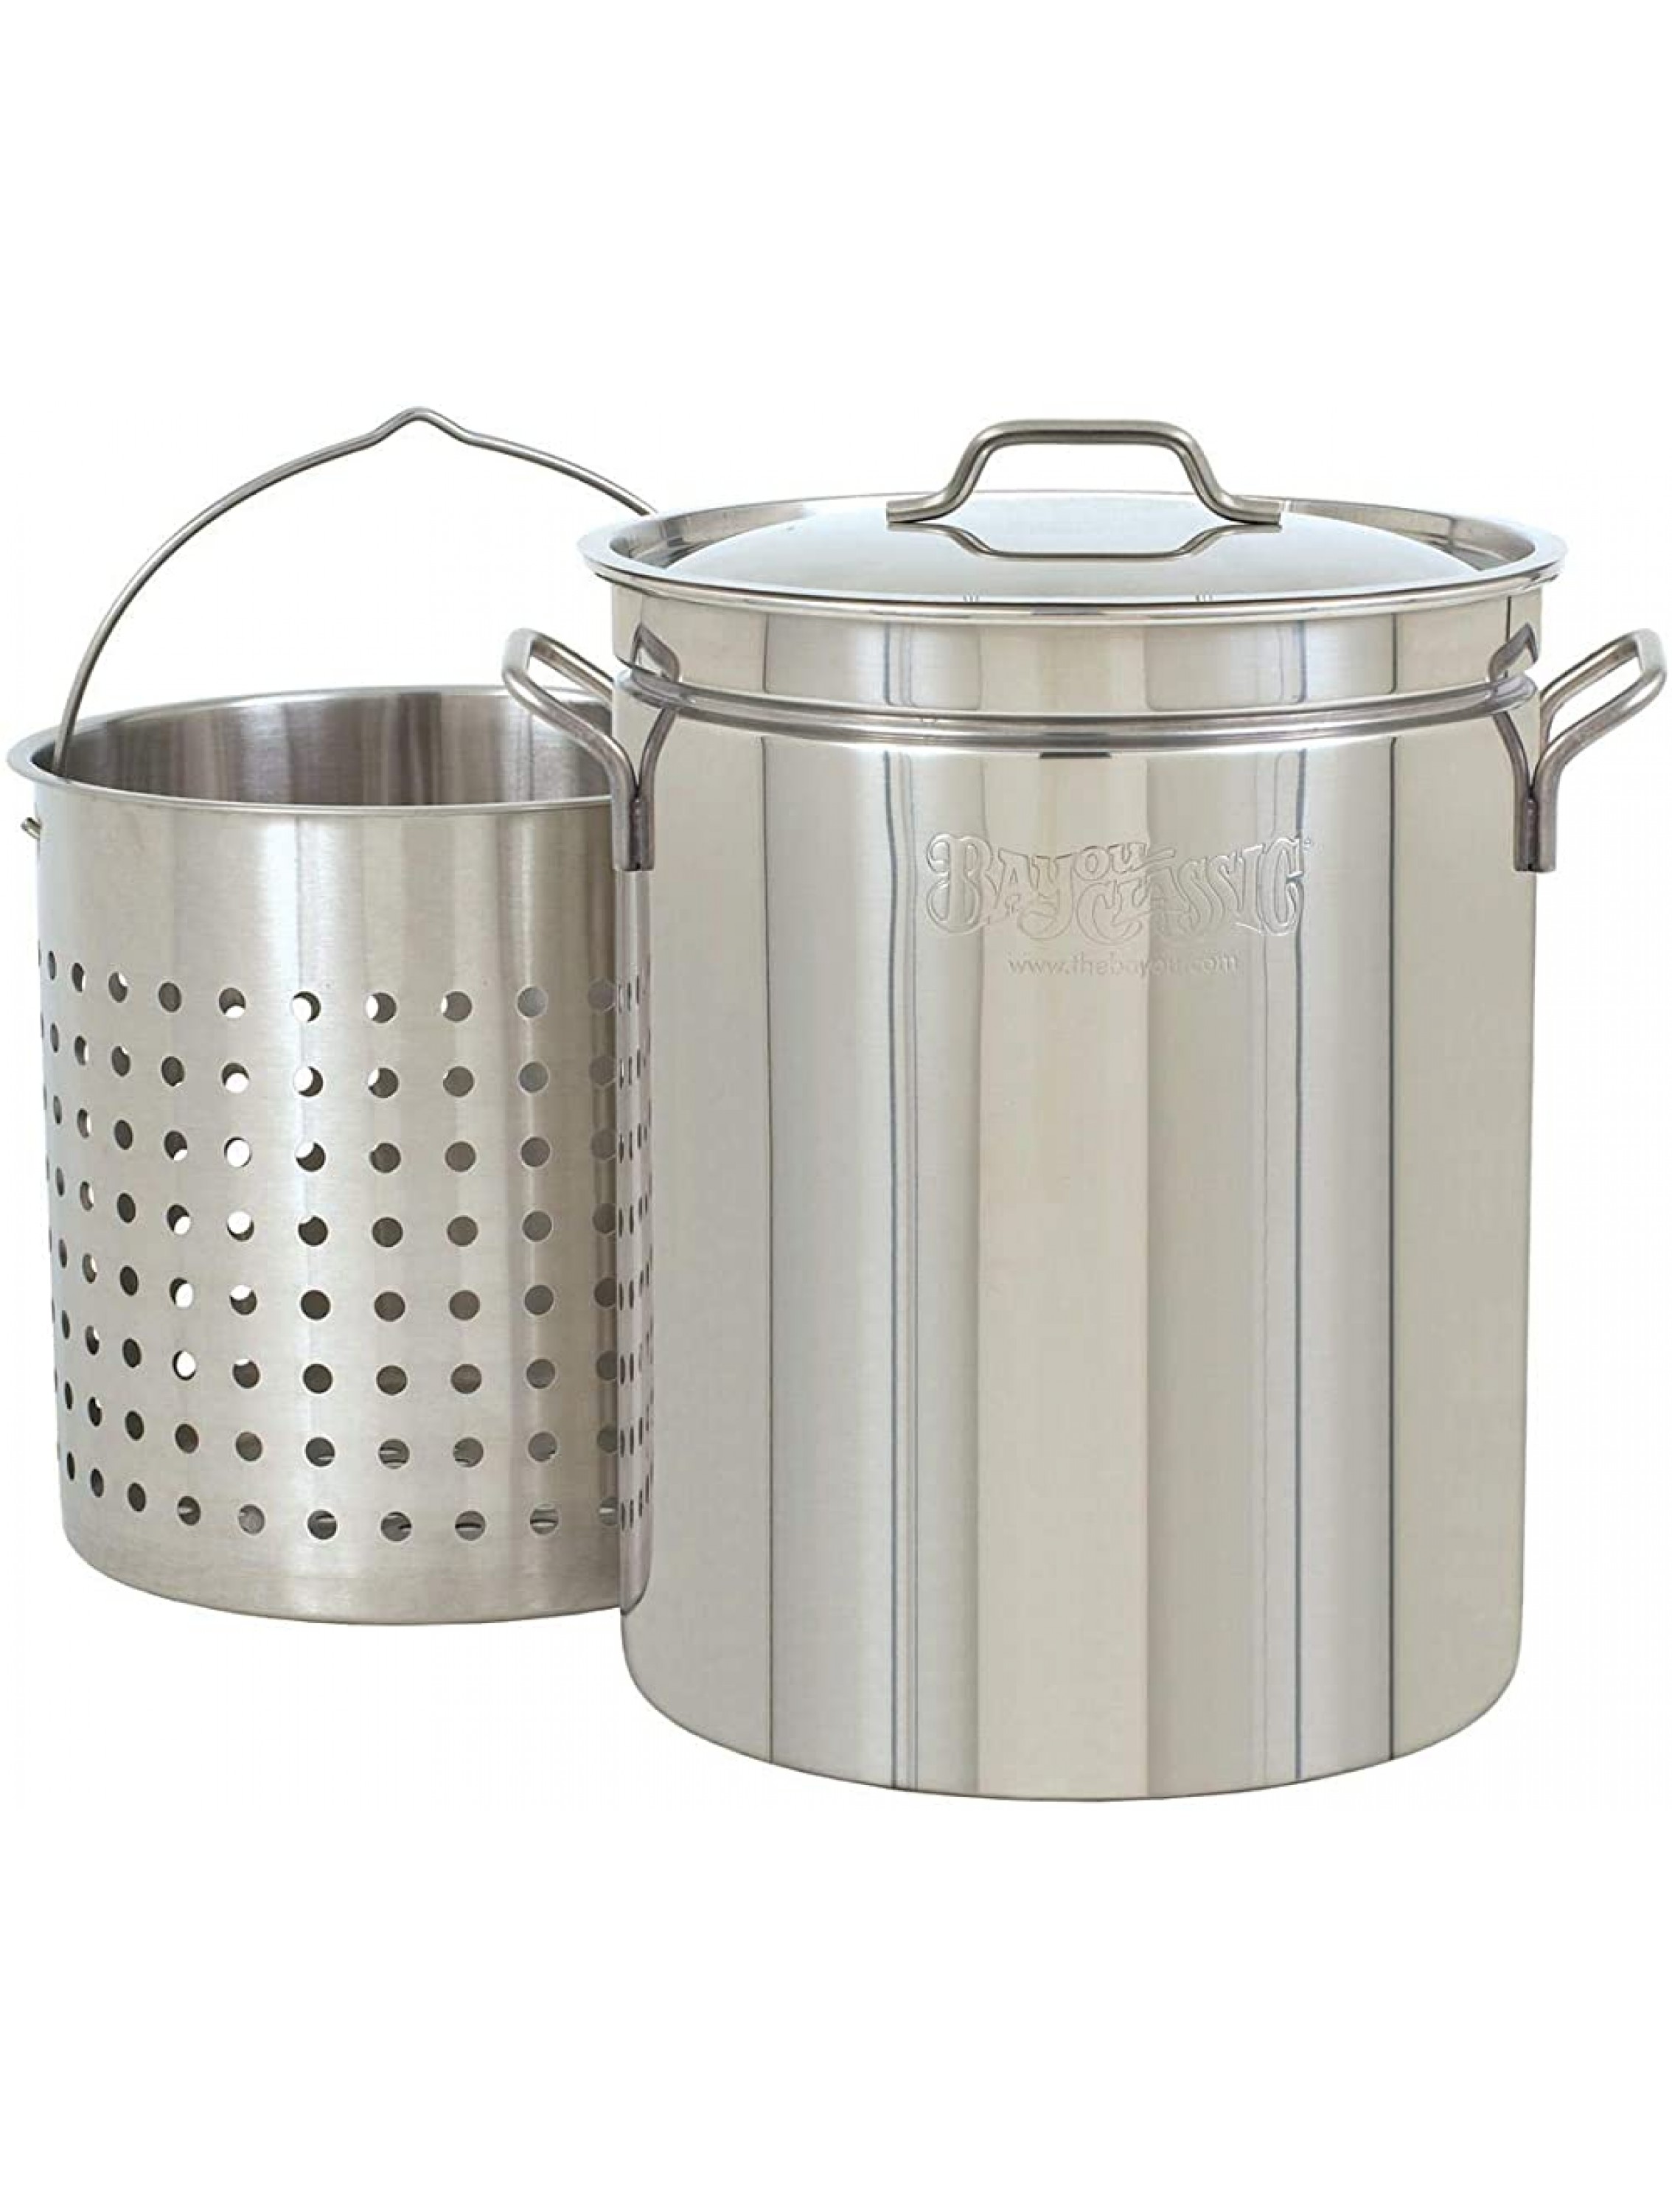 Bayou Classic 1144 1144-44-qt Stainless Stockpot with Basket 44 quarts Silver - B4G9ENWZ8